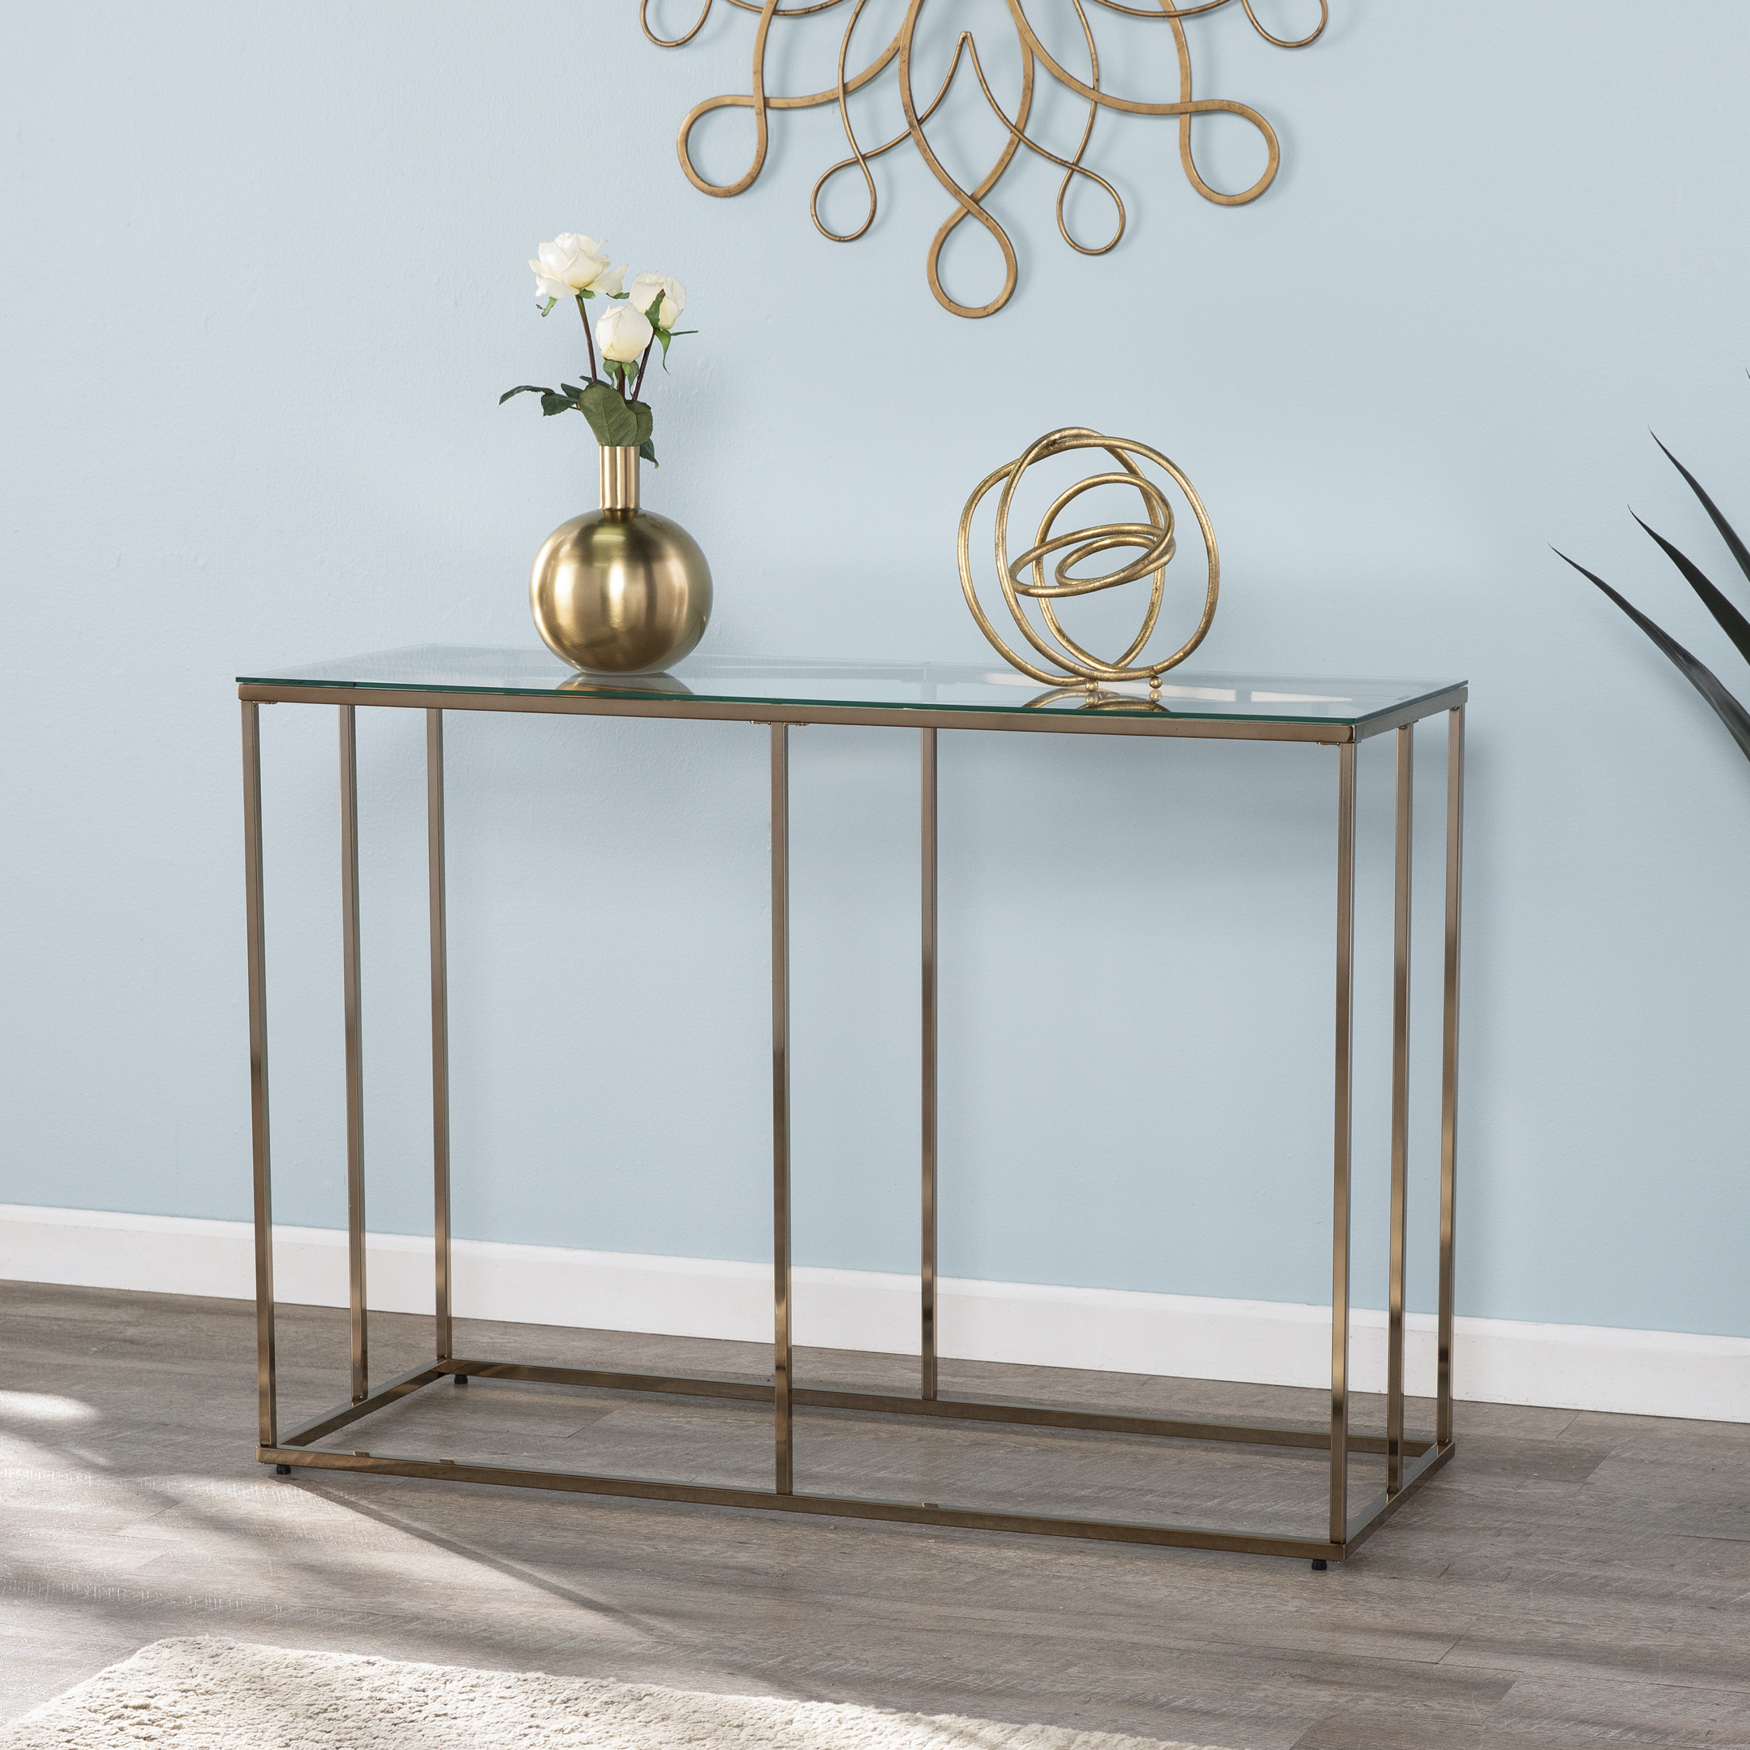 Nicholance Contemporary Glass-Top Console Table, CHAMPAGNE